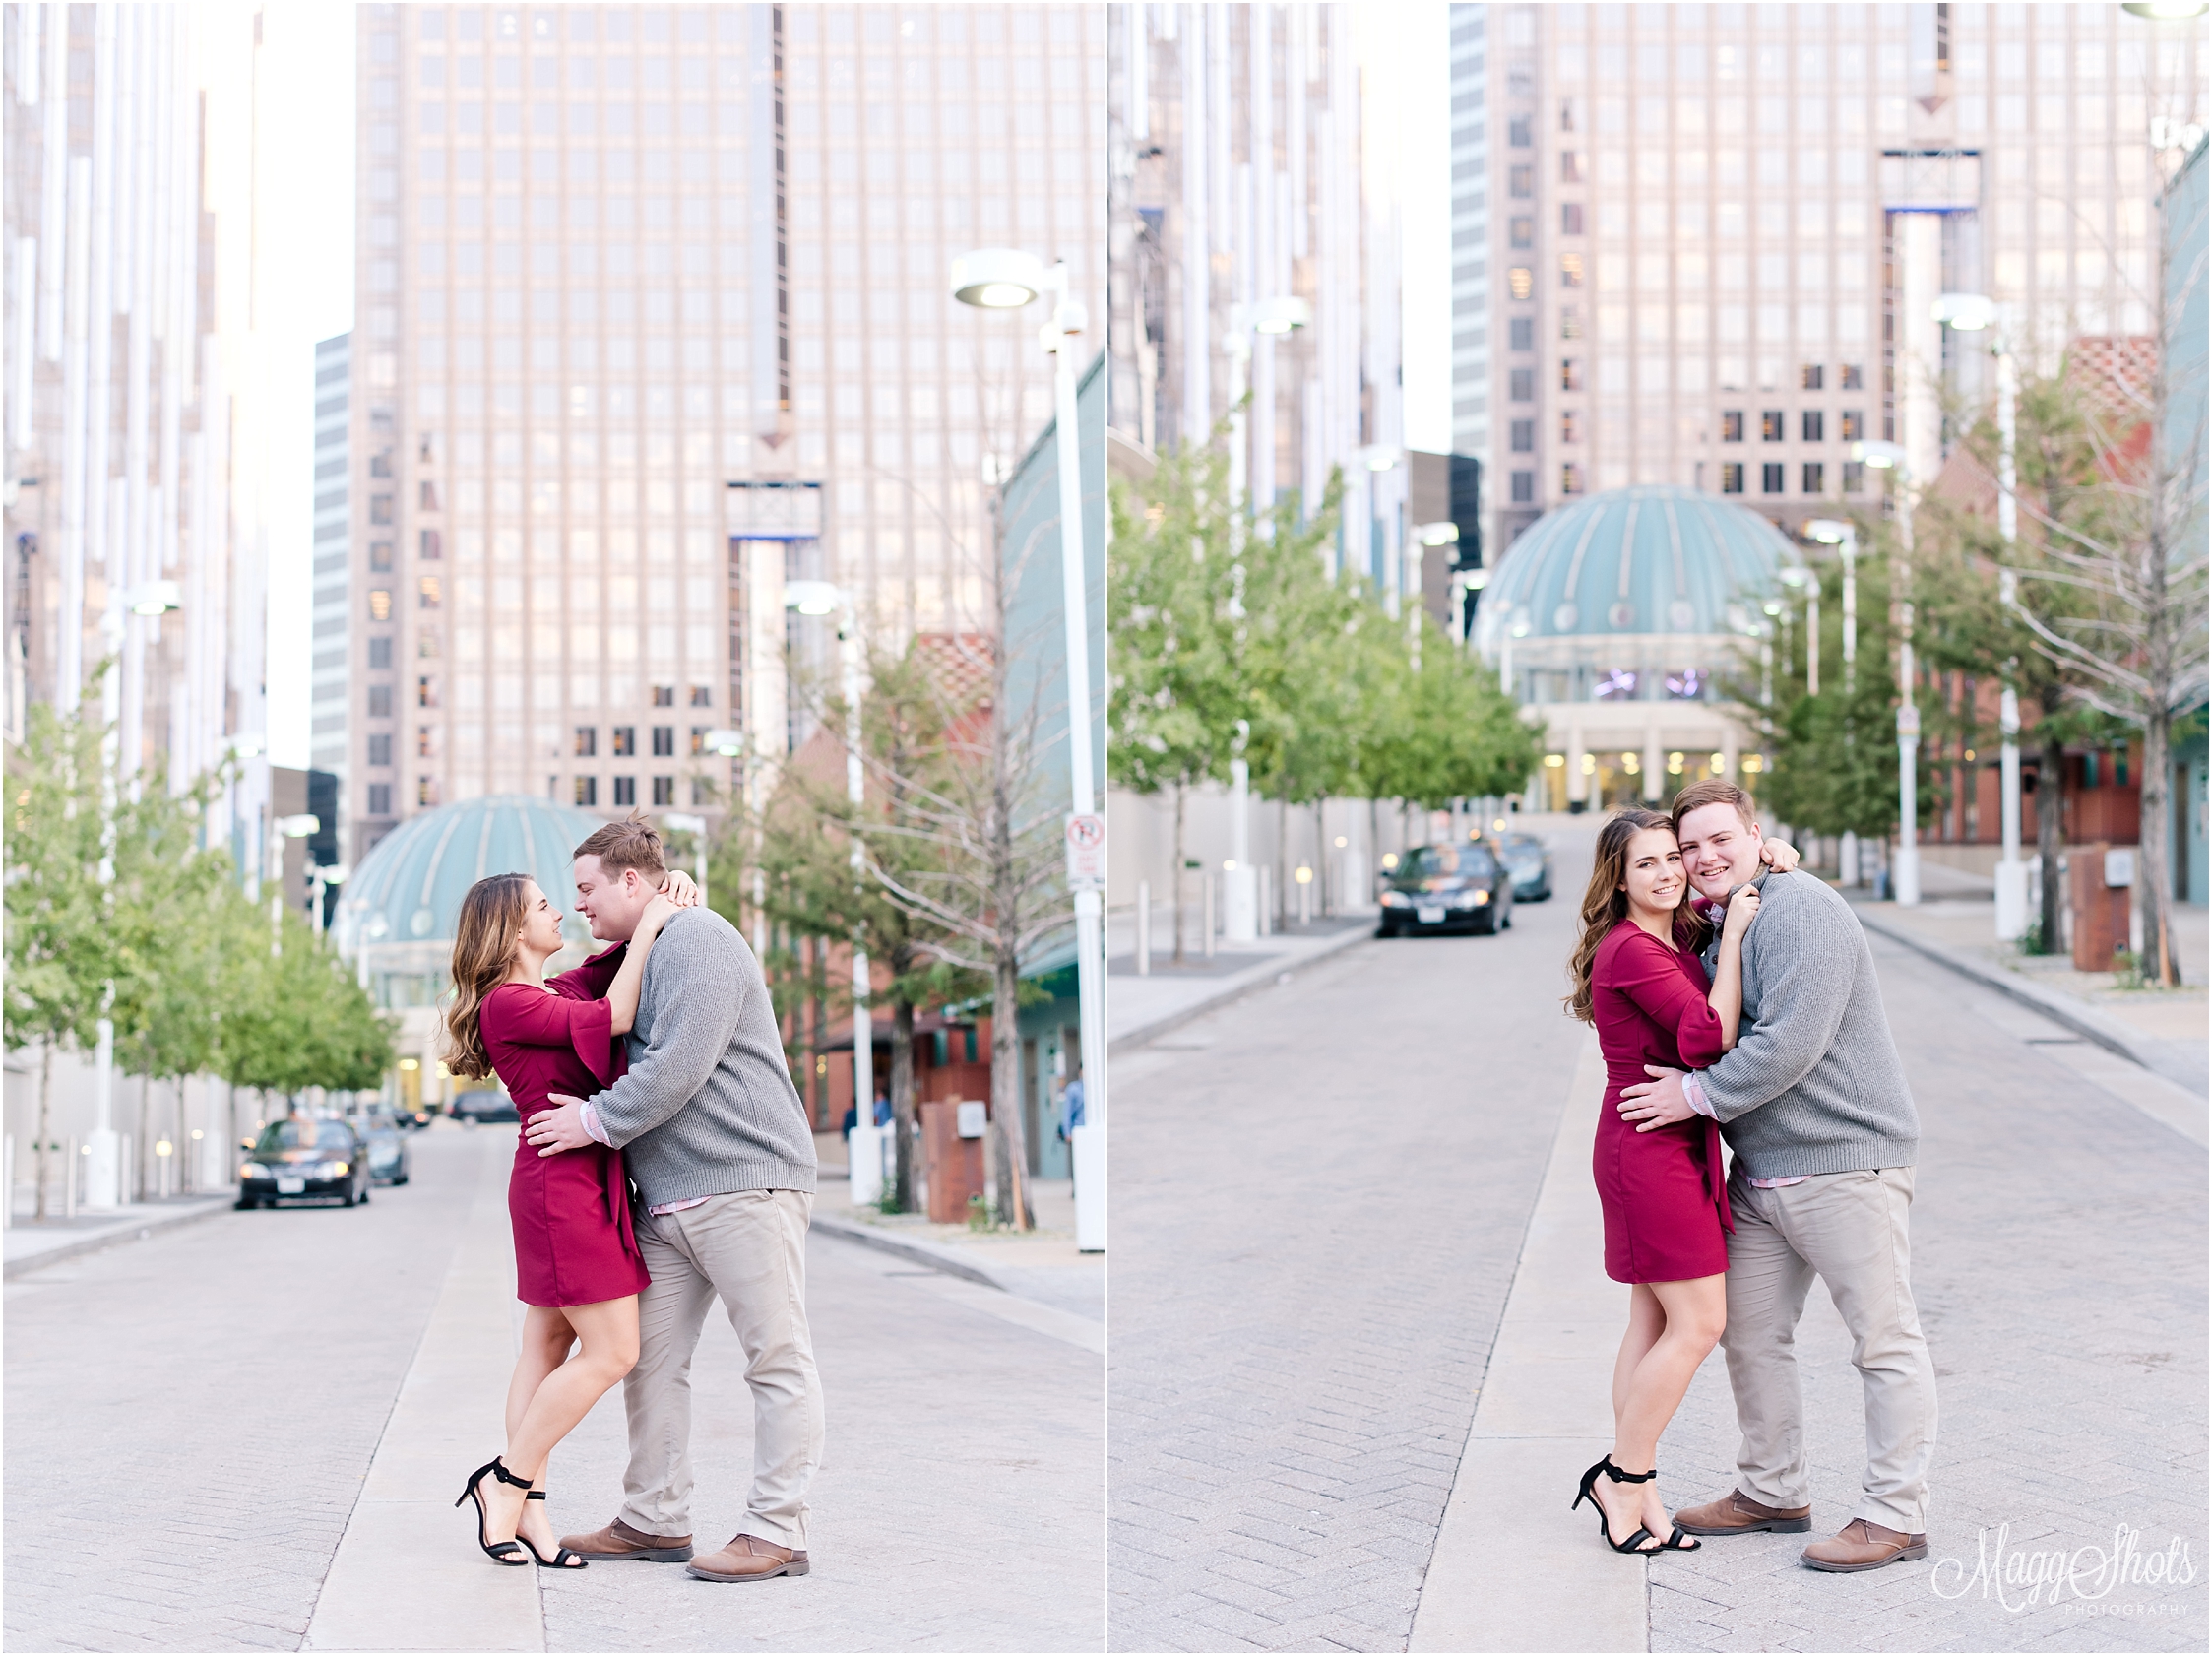 Love, Professional Photographer, Professional Photography, Winspear Opera House, Engagements, Couple, Bride and Groom, Dallas, MaggShots Photography, MaggShots, Klyde Warren Park